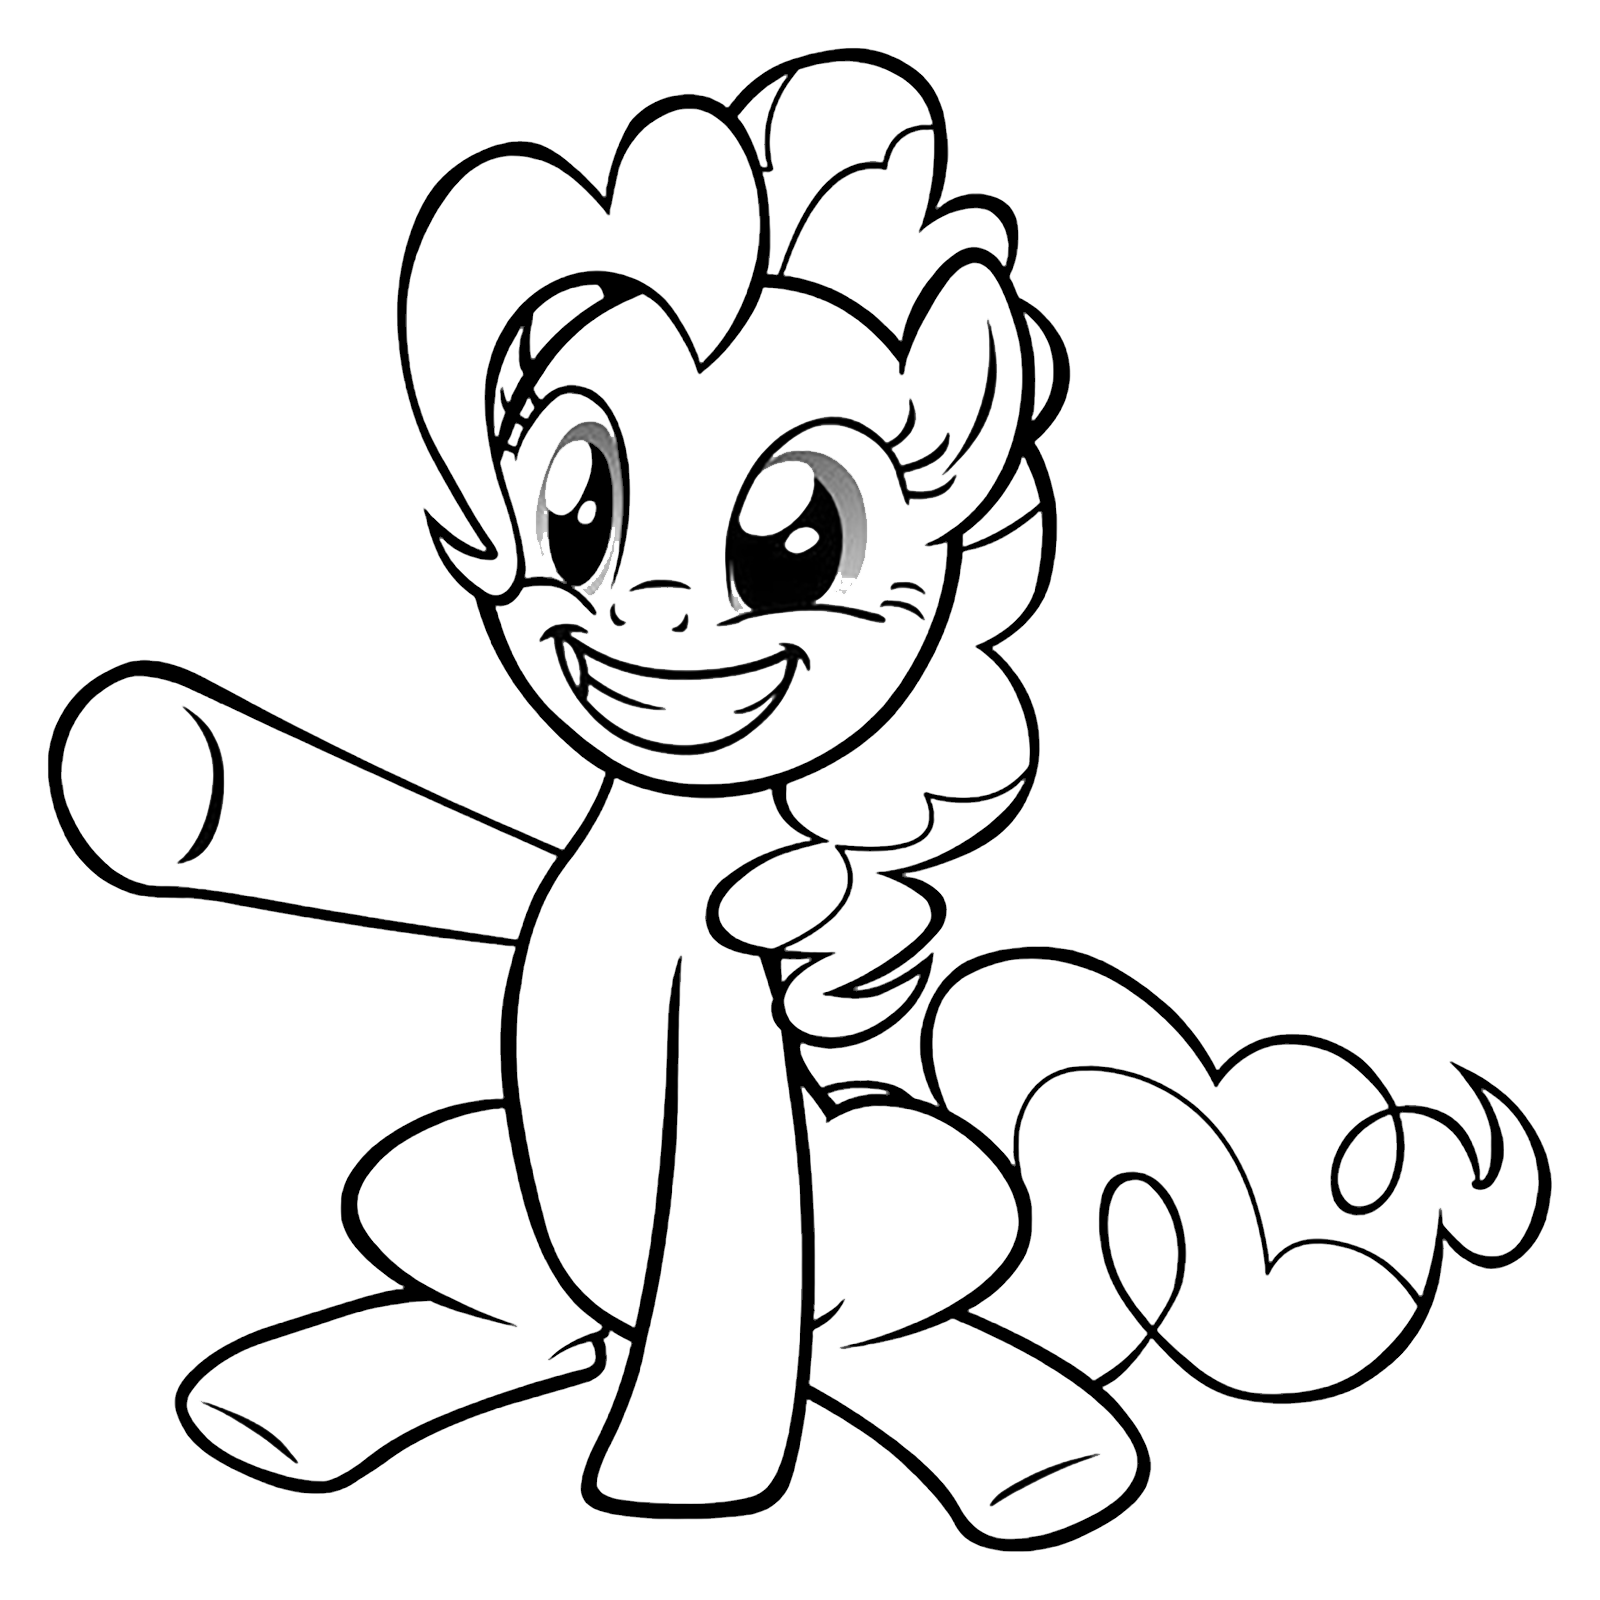 My Little Pony - Pinkie Pie raises a paw and smiles